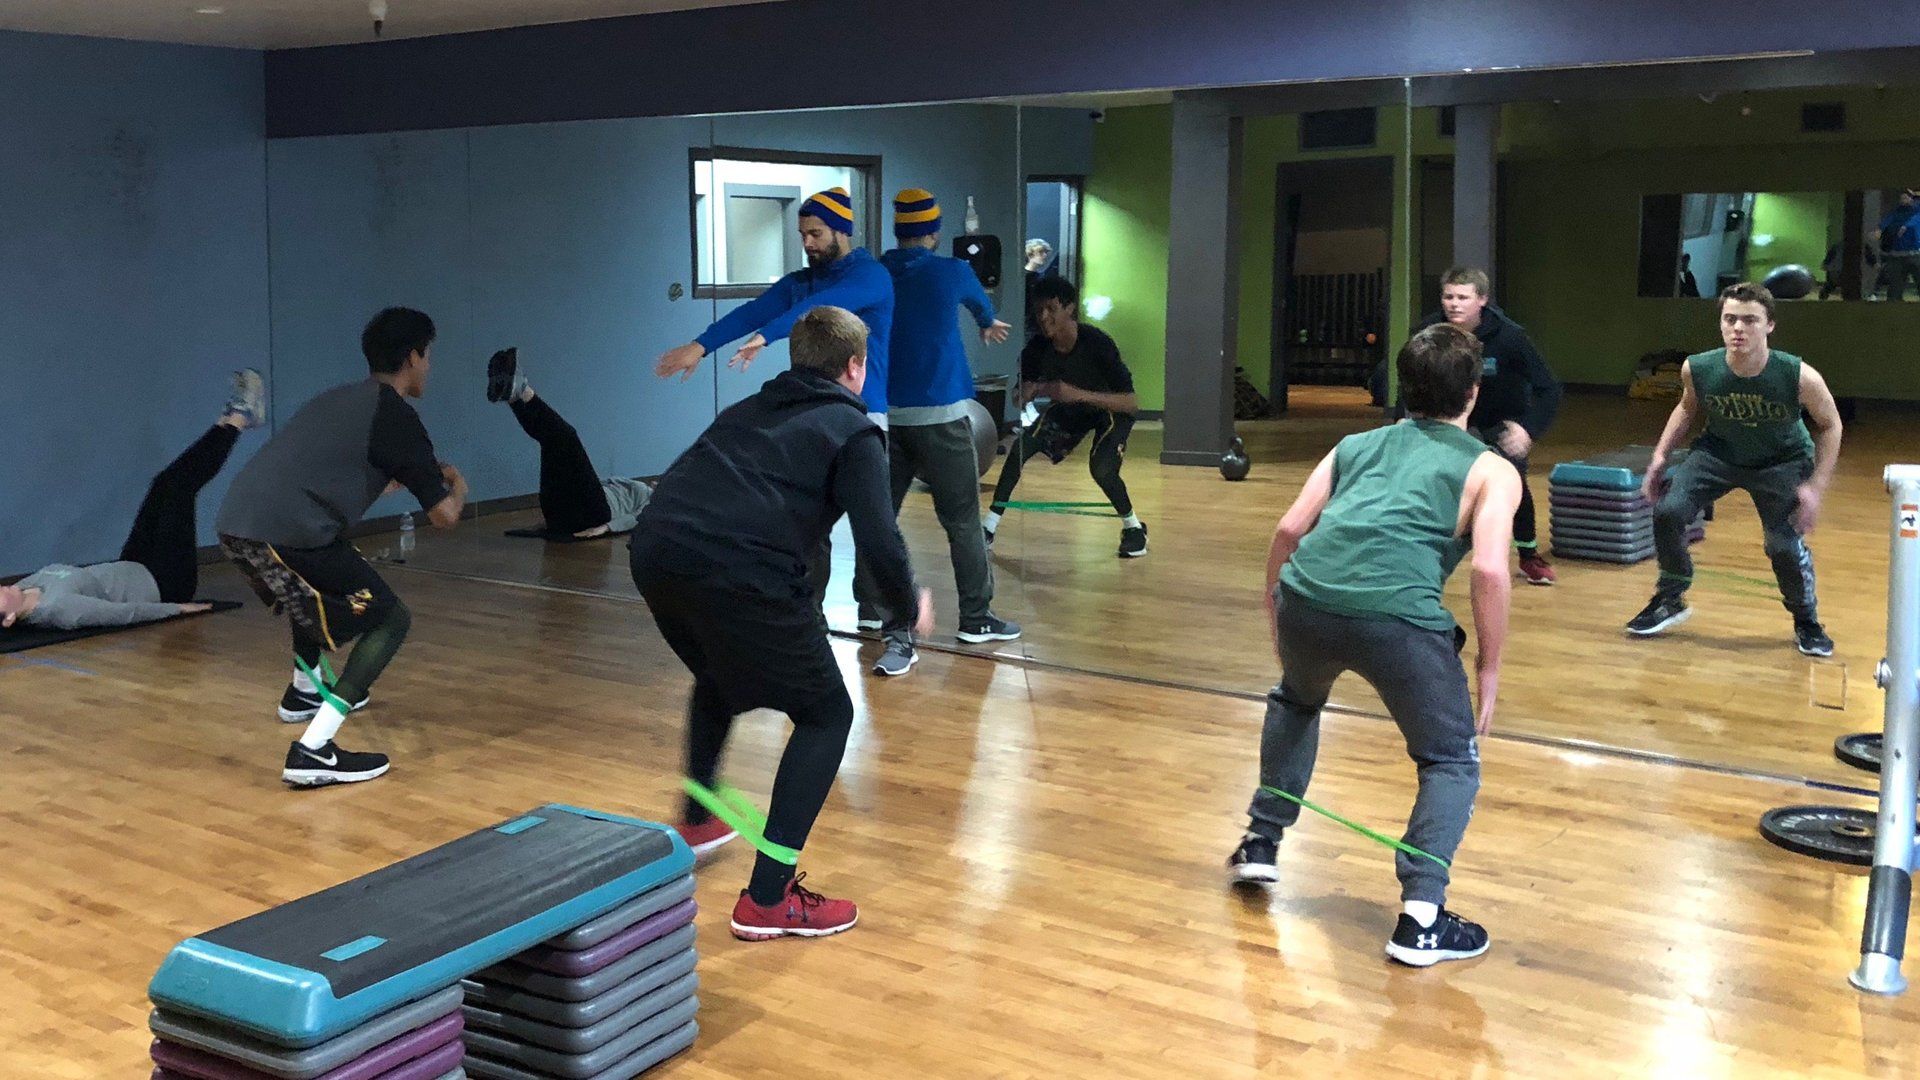 A group of people are doing exercises in a gym.